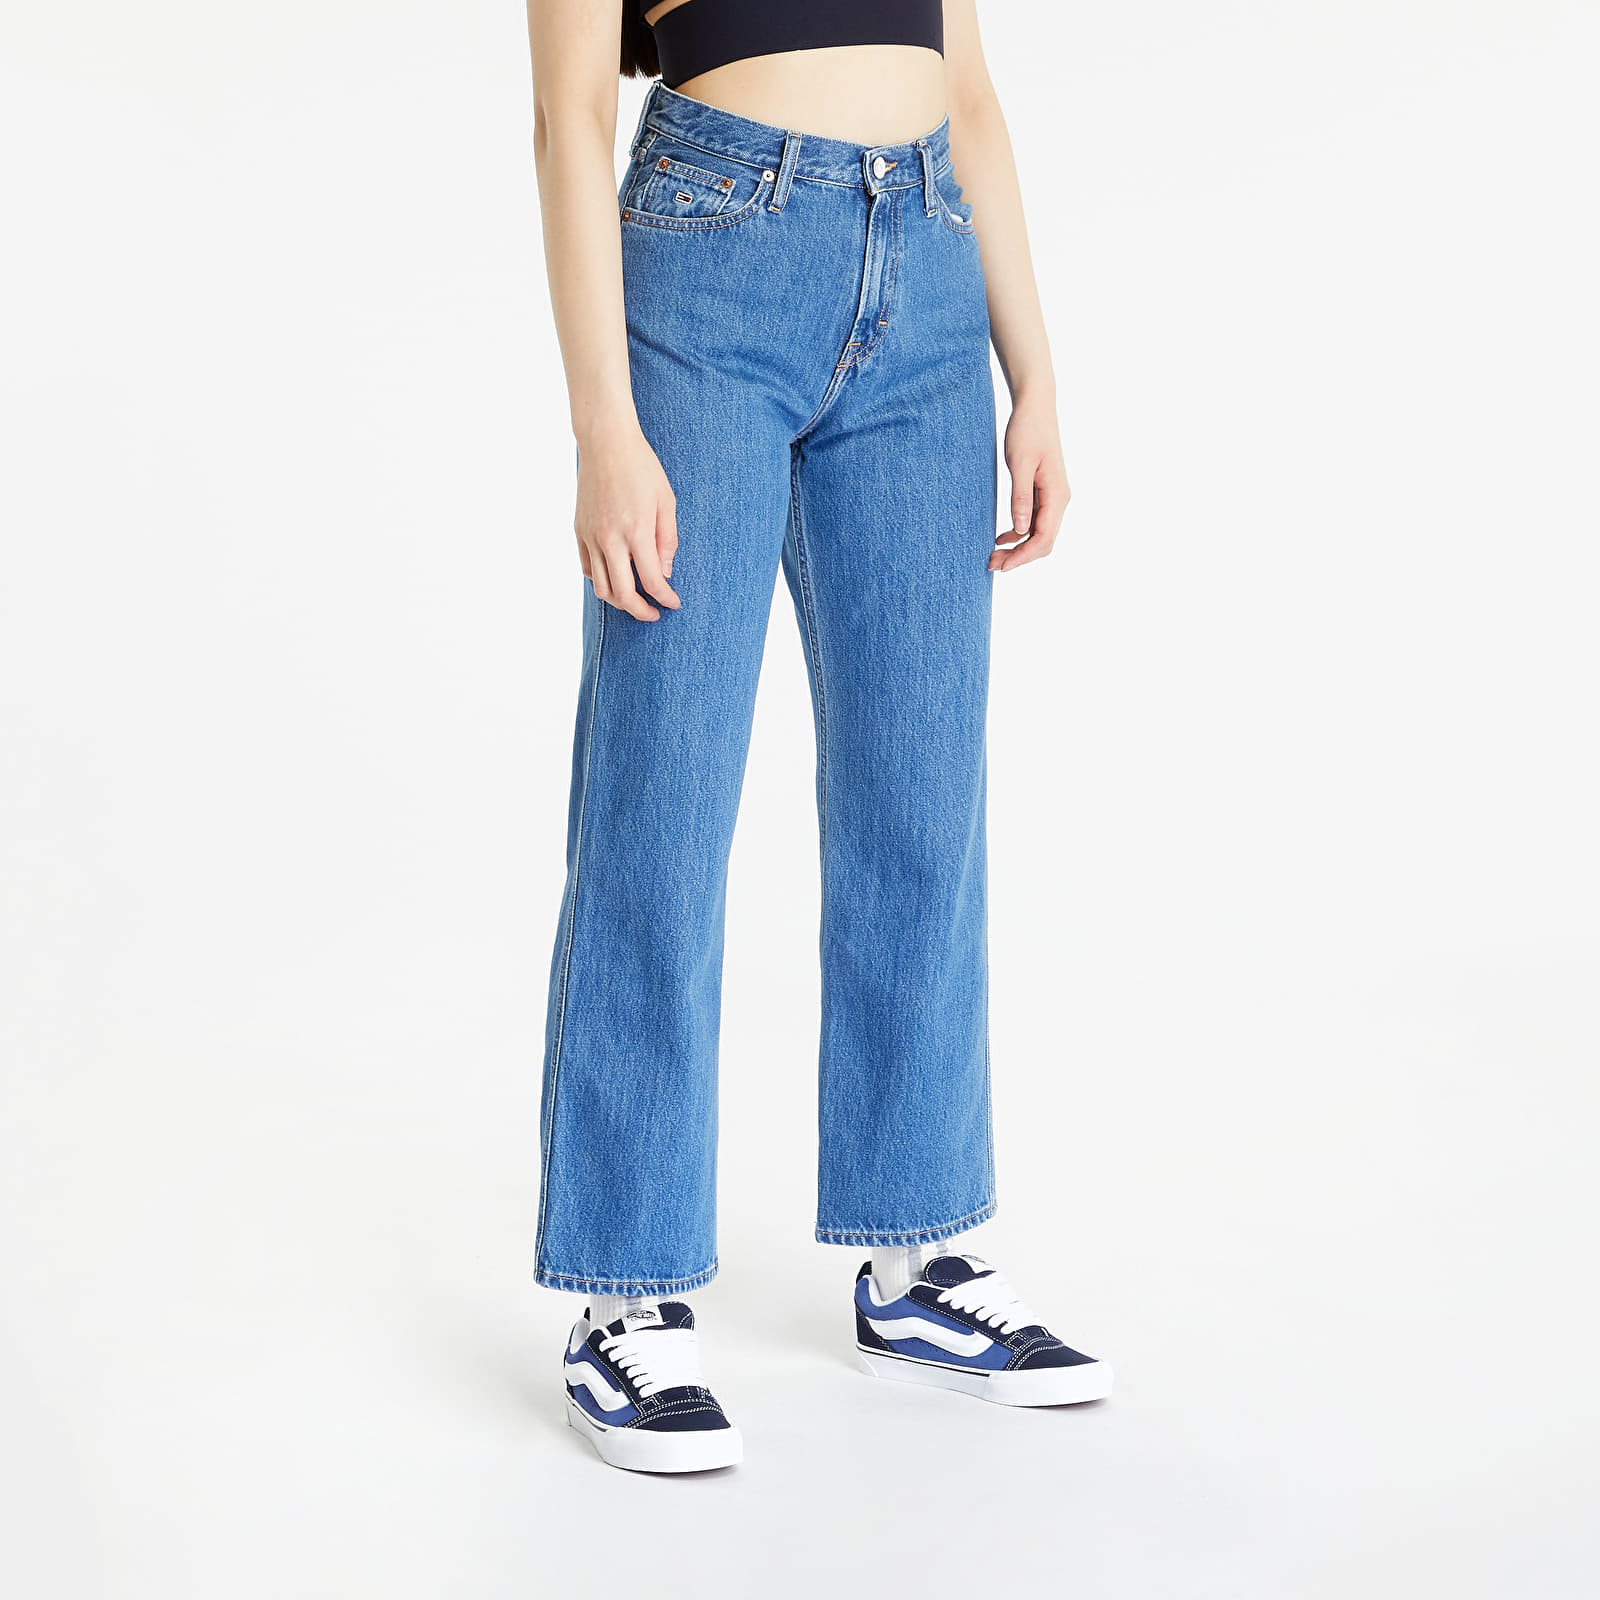 Tommy Hilfiger - Tommy Jeans Betsy Mid Rise Loose Jeans Denim Medium